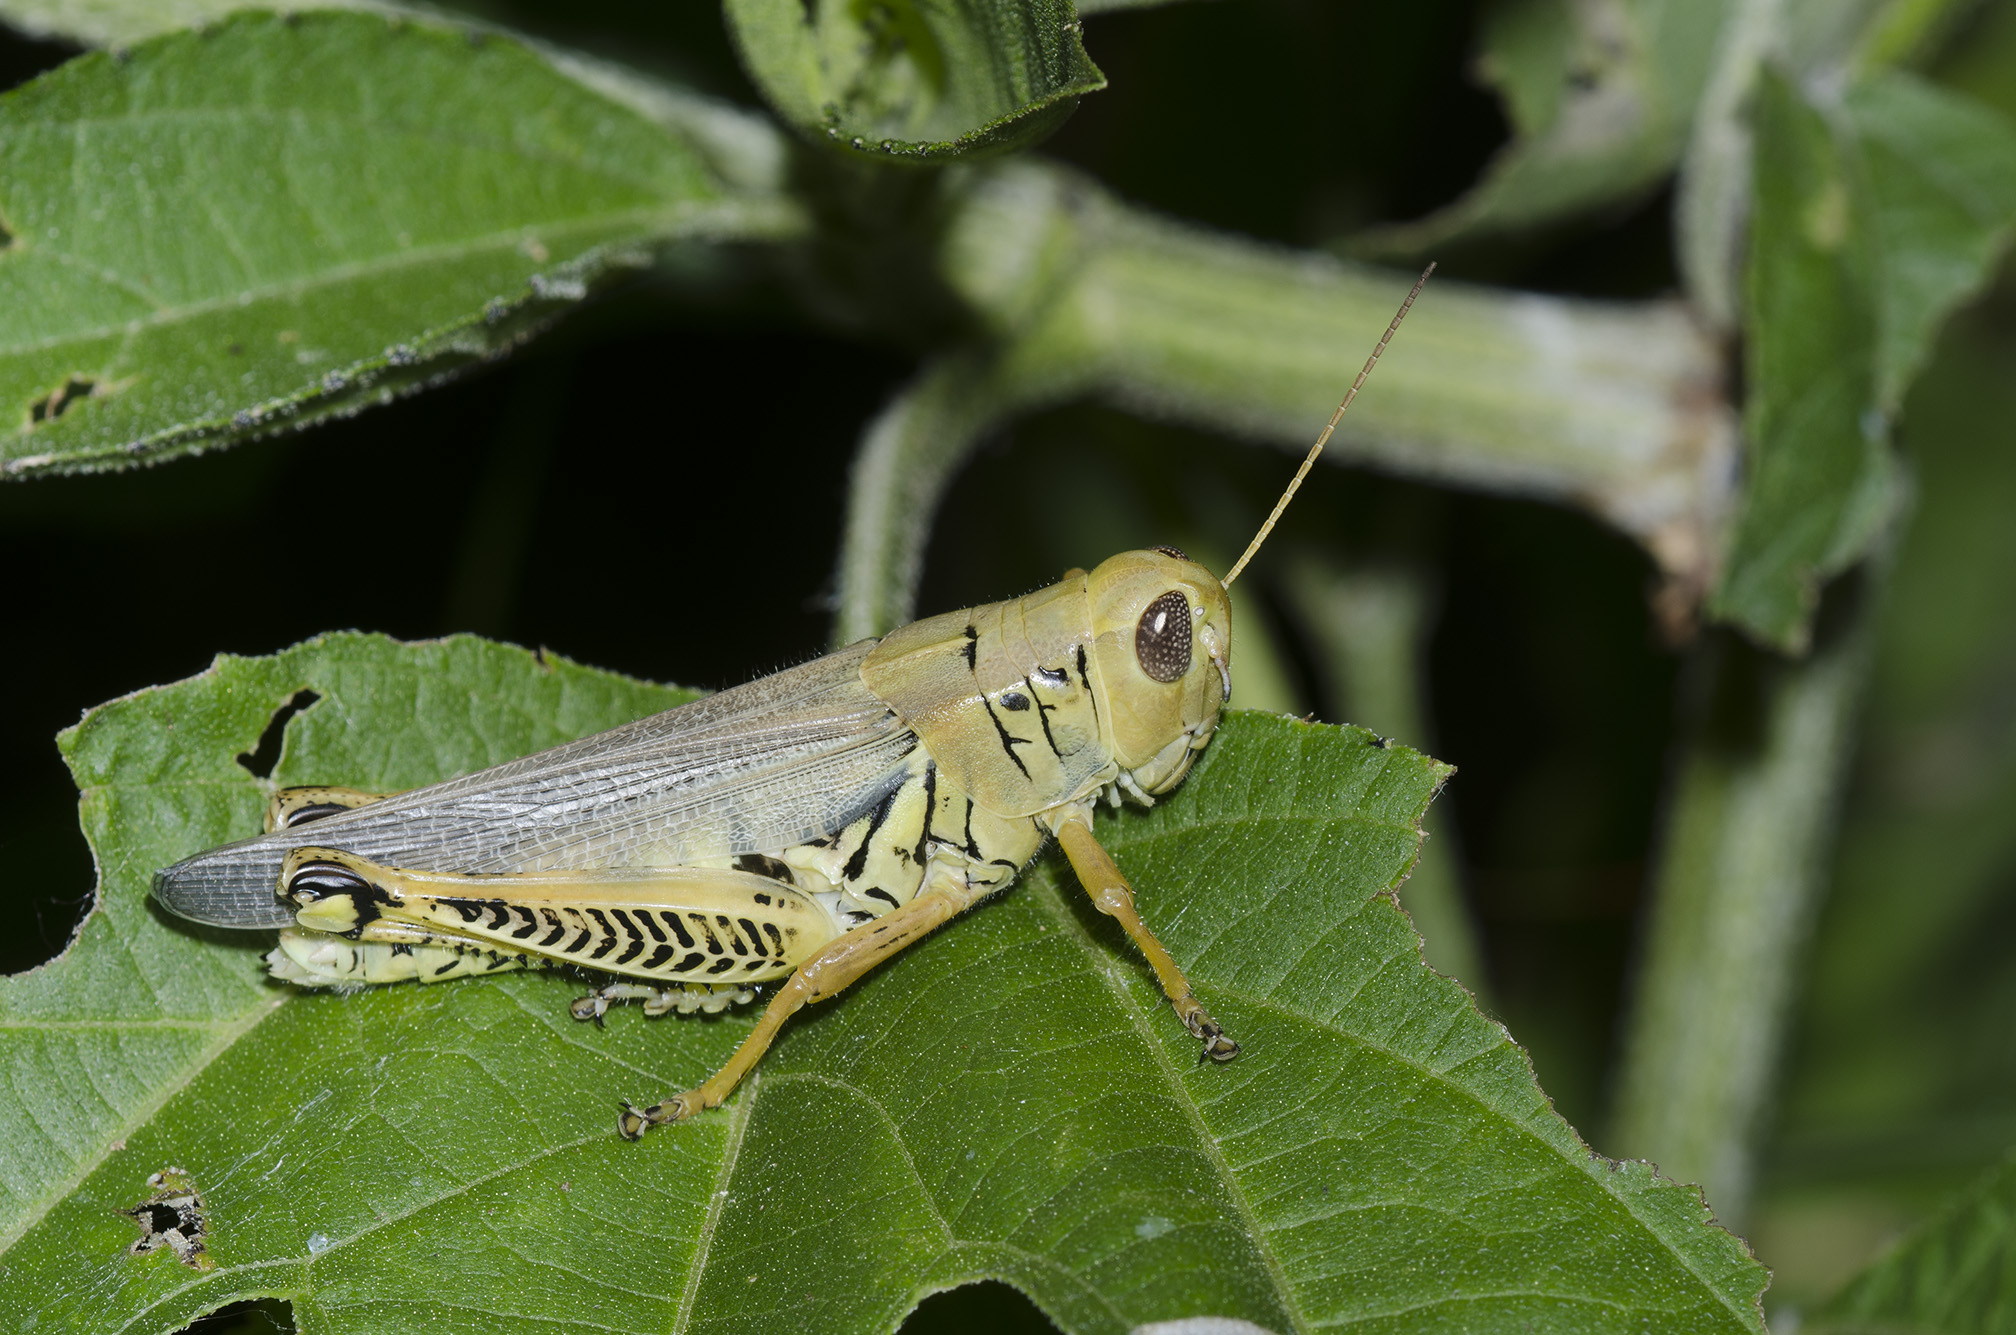 A close up of a grasshopper sitting on a green leaf. The grasshopper is facing to the right, with its wings closed over its back. It is a pale greenish brown color and has black markings.